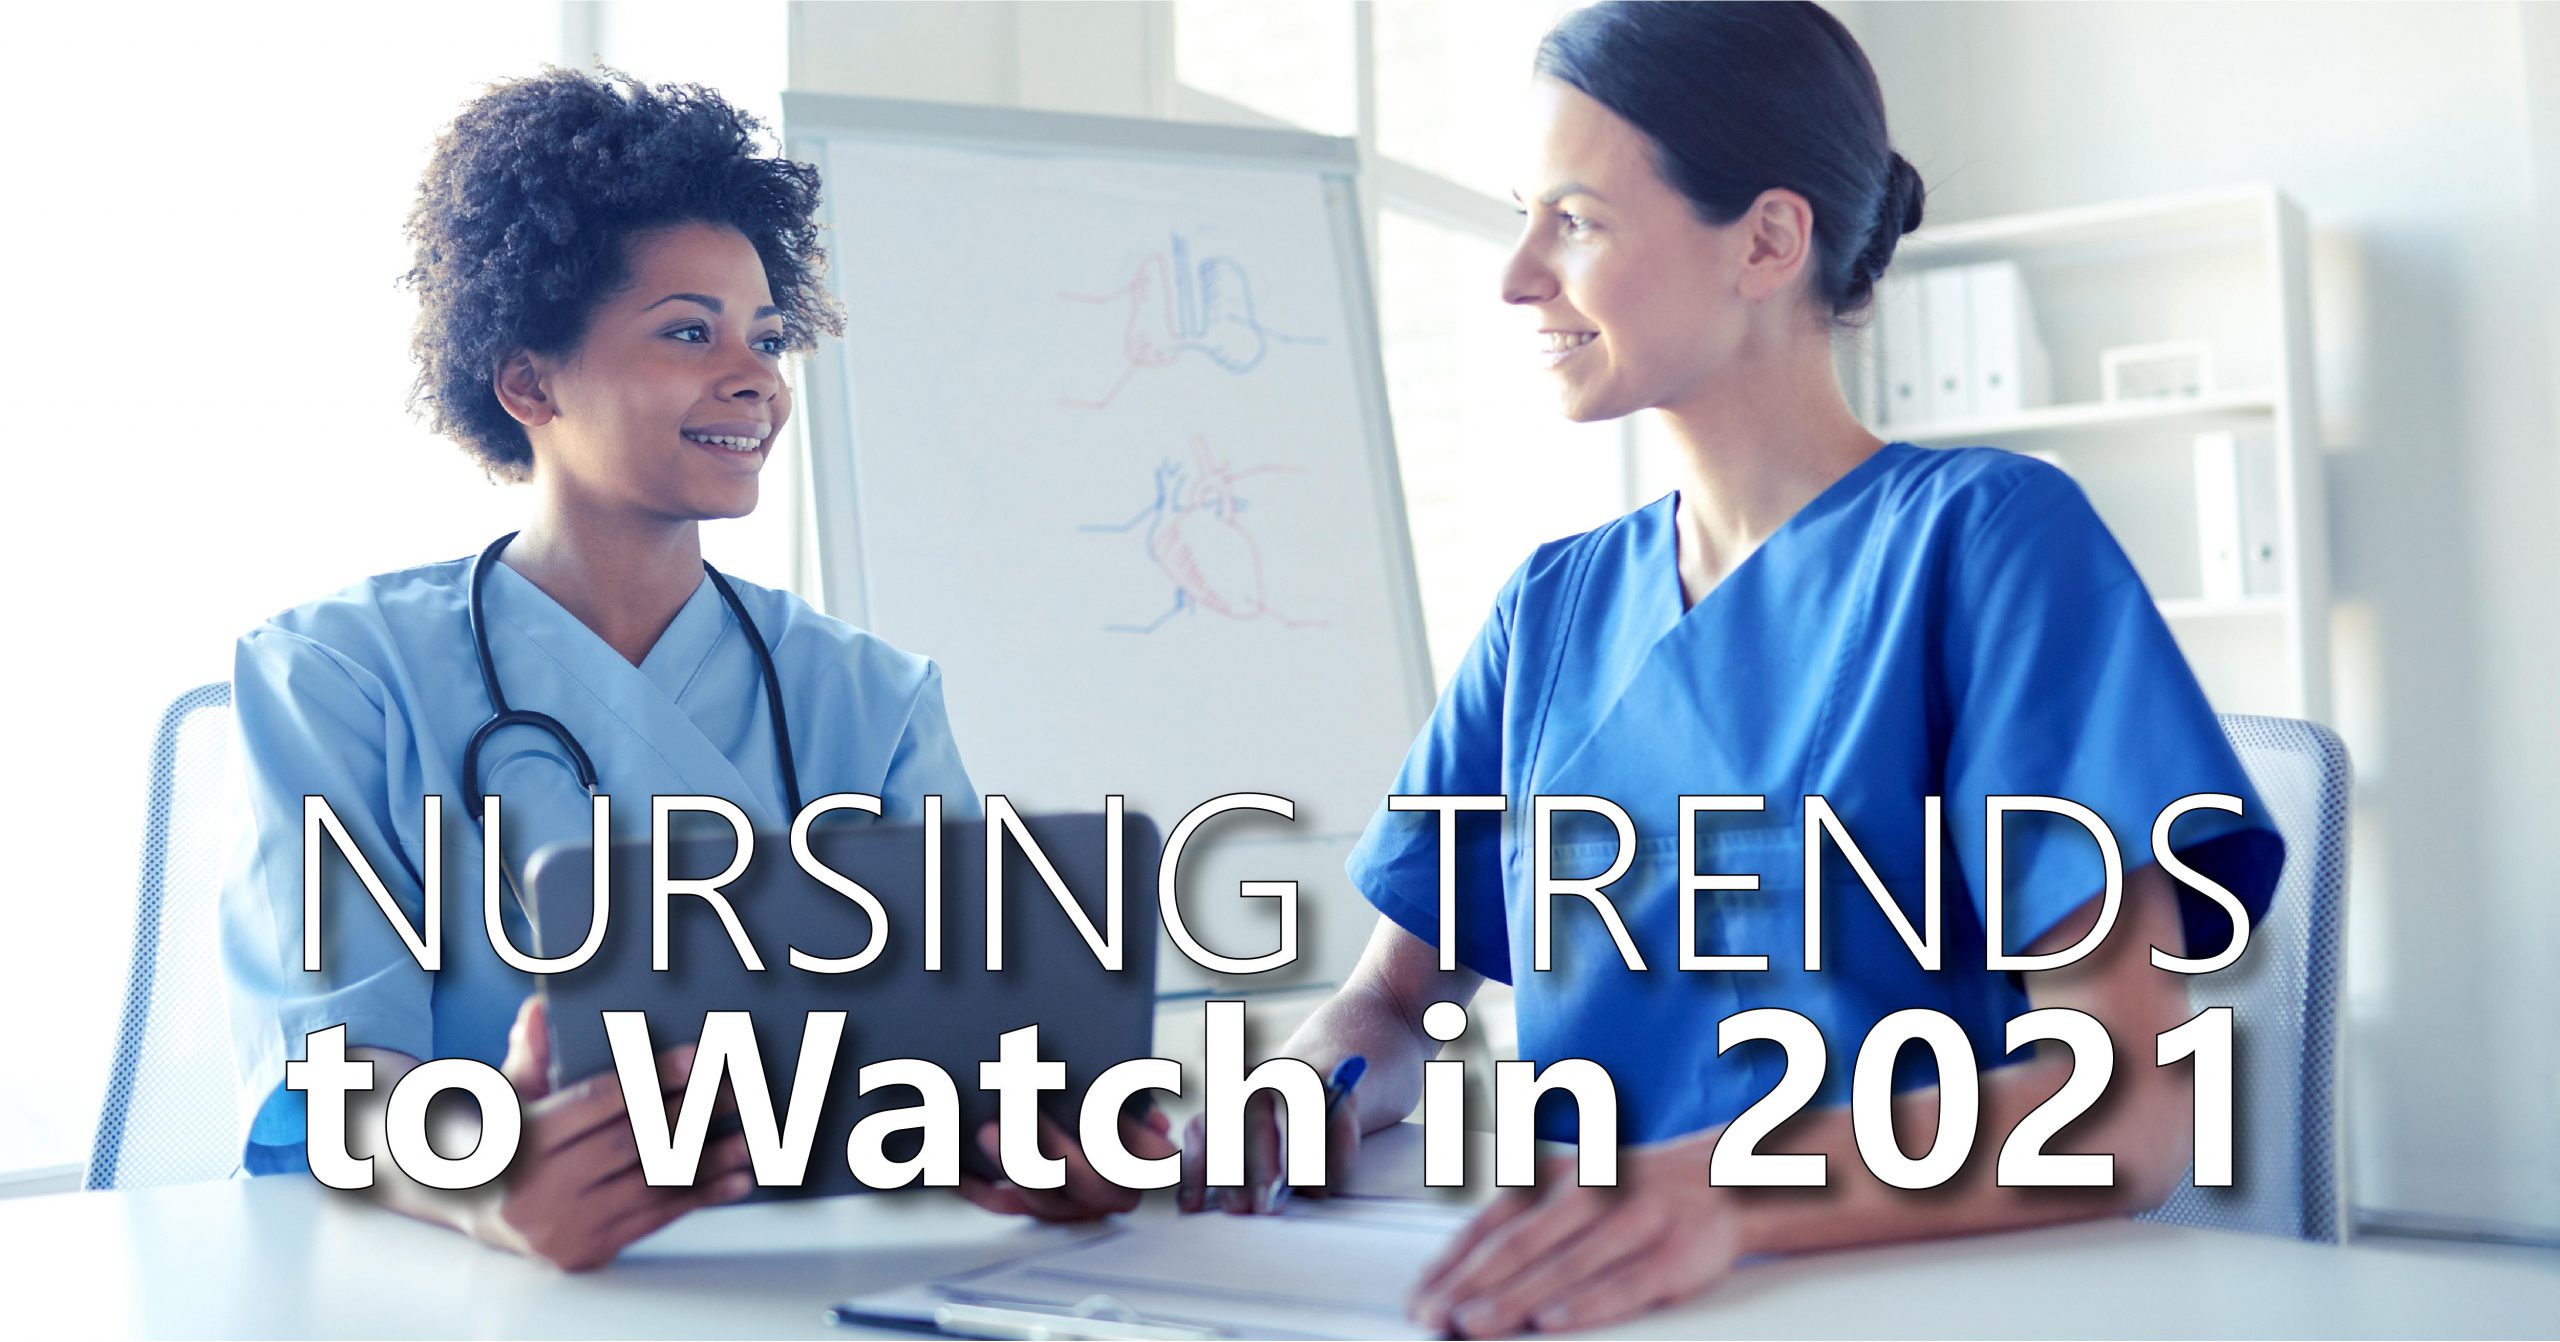 Two nurses are smiling, facing each other in discussion. The female nurse on the left is holding a tablet device and wearing a stethoscope. The name of the article, "Nursing Trends to Watch in 2021" is centered across the bottom of the image